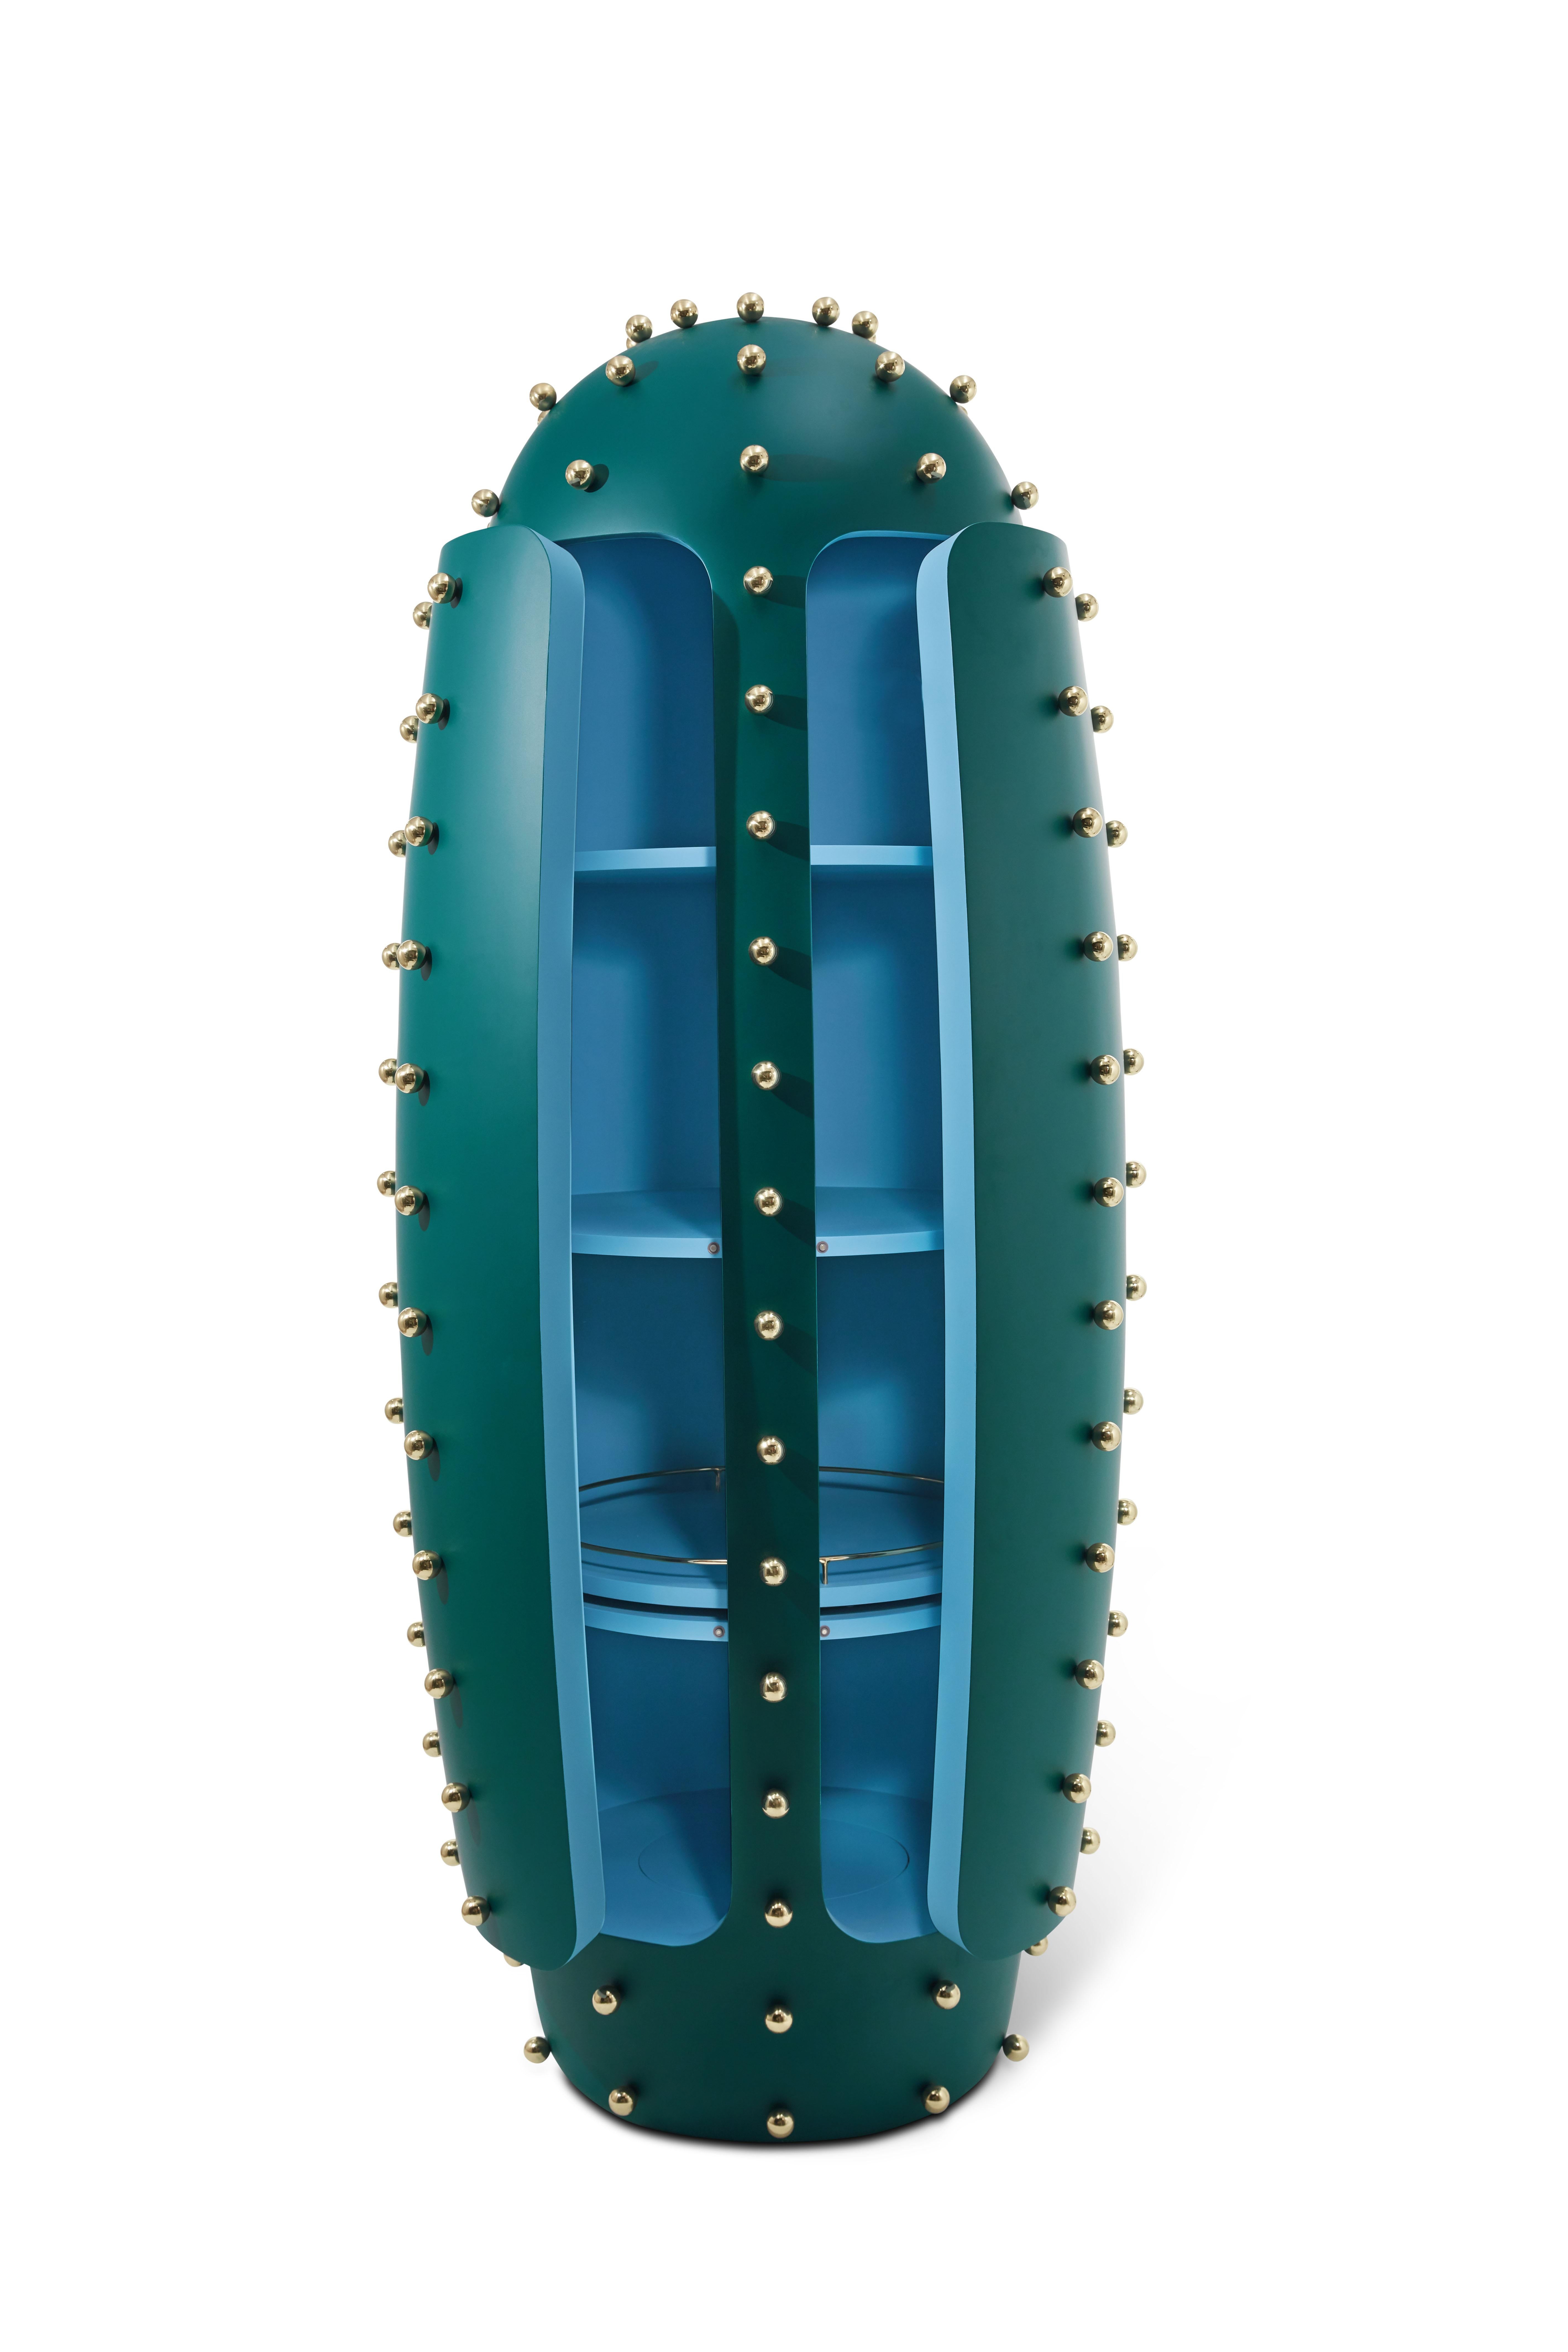 Oasis Bar Cabinet in Green with Brass Balls by Richard Hutten is a novel deep green cabinet with pale blue interiors. It is covered in gleaming brass spheres reminiscent of thorns on a succulent cactus.

The Oasis collection for Scarlet Splendour by